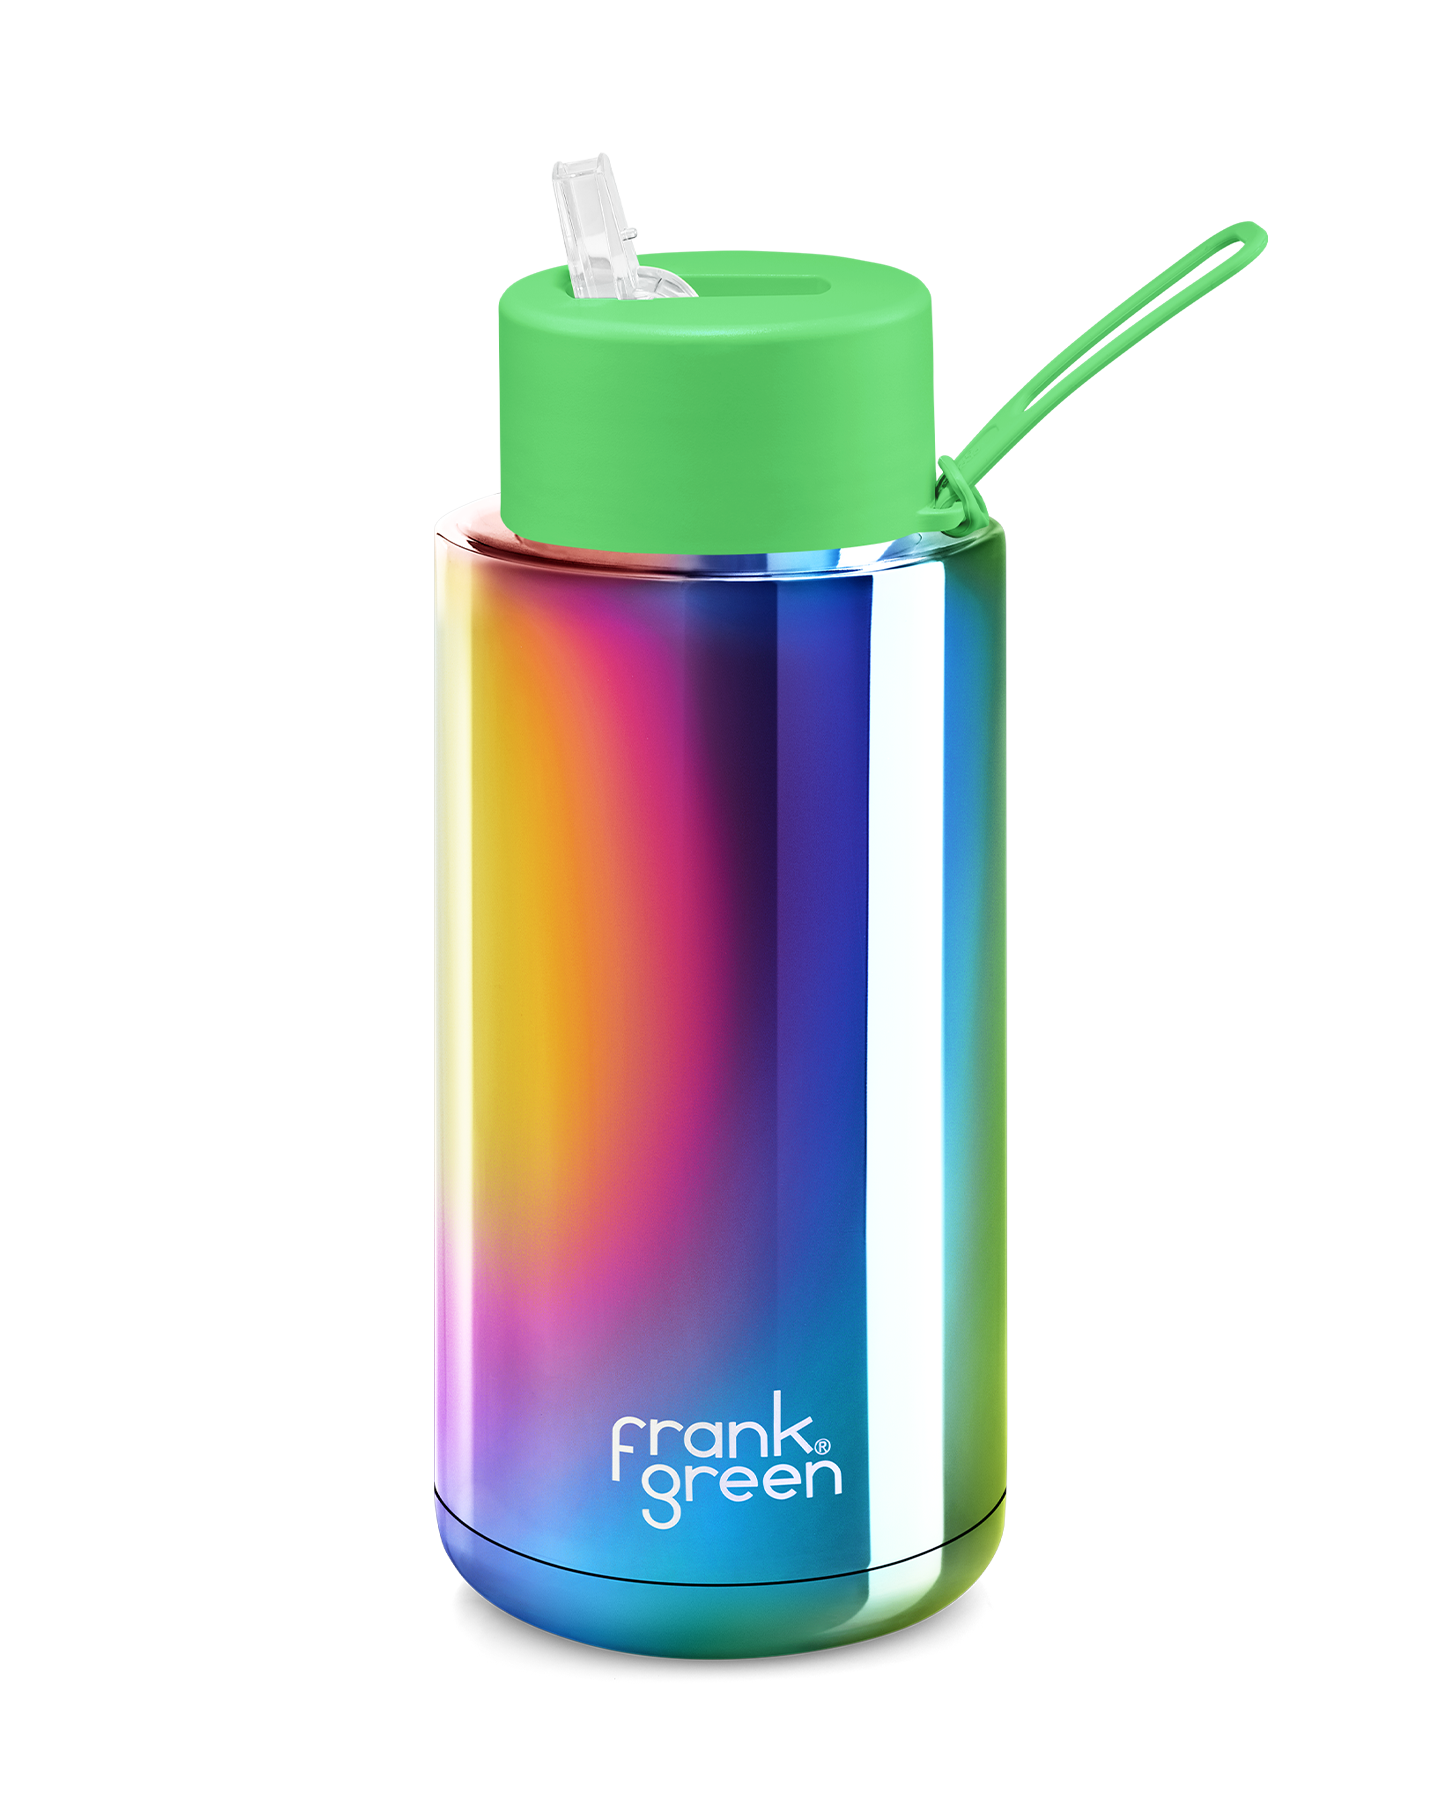 FRANK GREEN CHROME RAINBOW CERAMIC REUSABLE BOTTLE 34oz/1 LITRE WITH STRAW LID - NEON GREEN